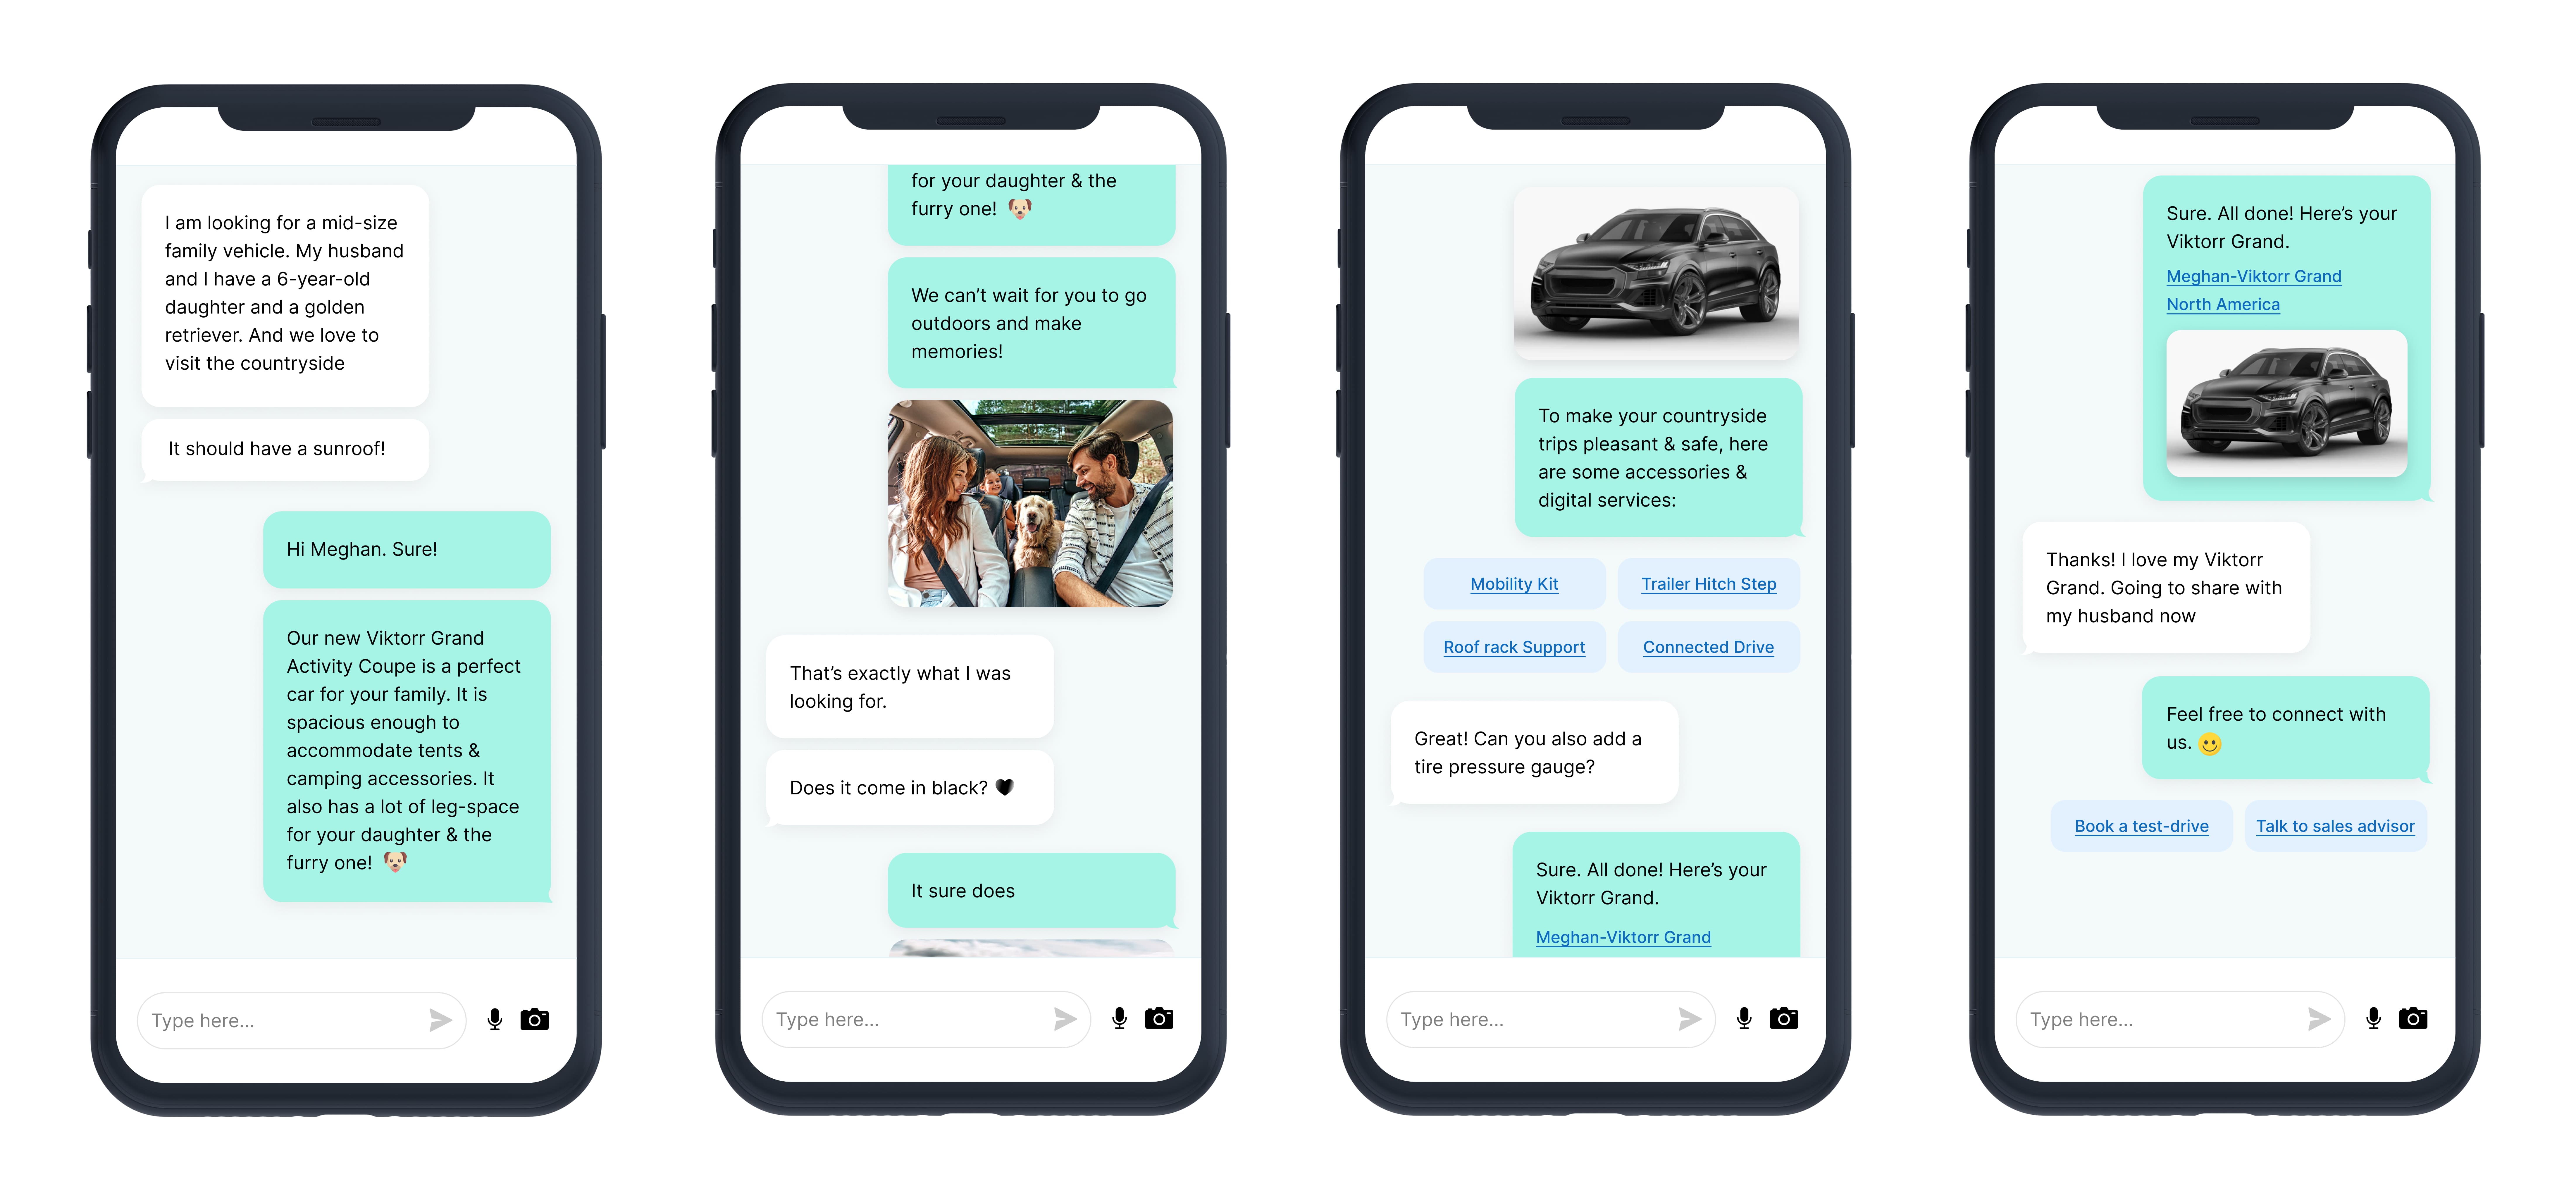 AI-powered Chatbot makes intelligent recommendations based on customers’ preferences for automotive sales